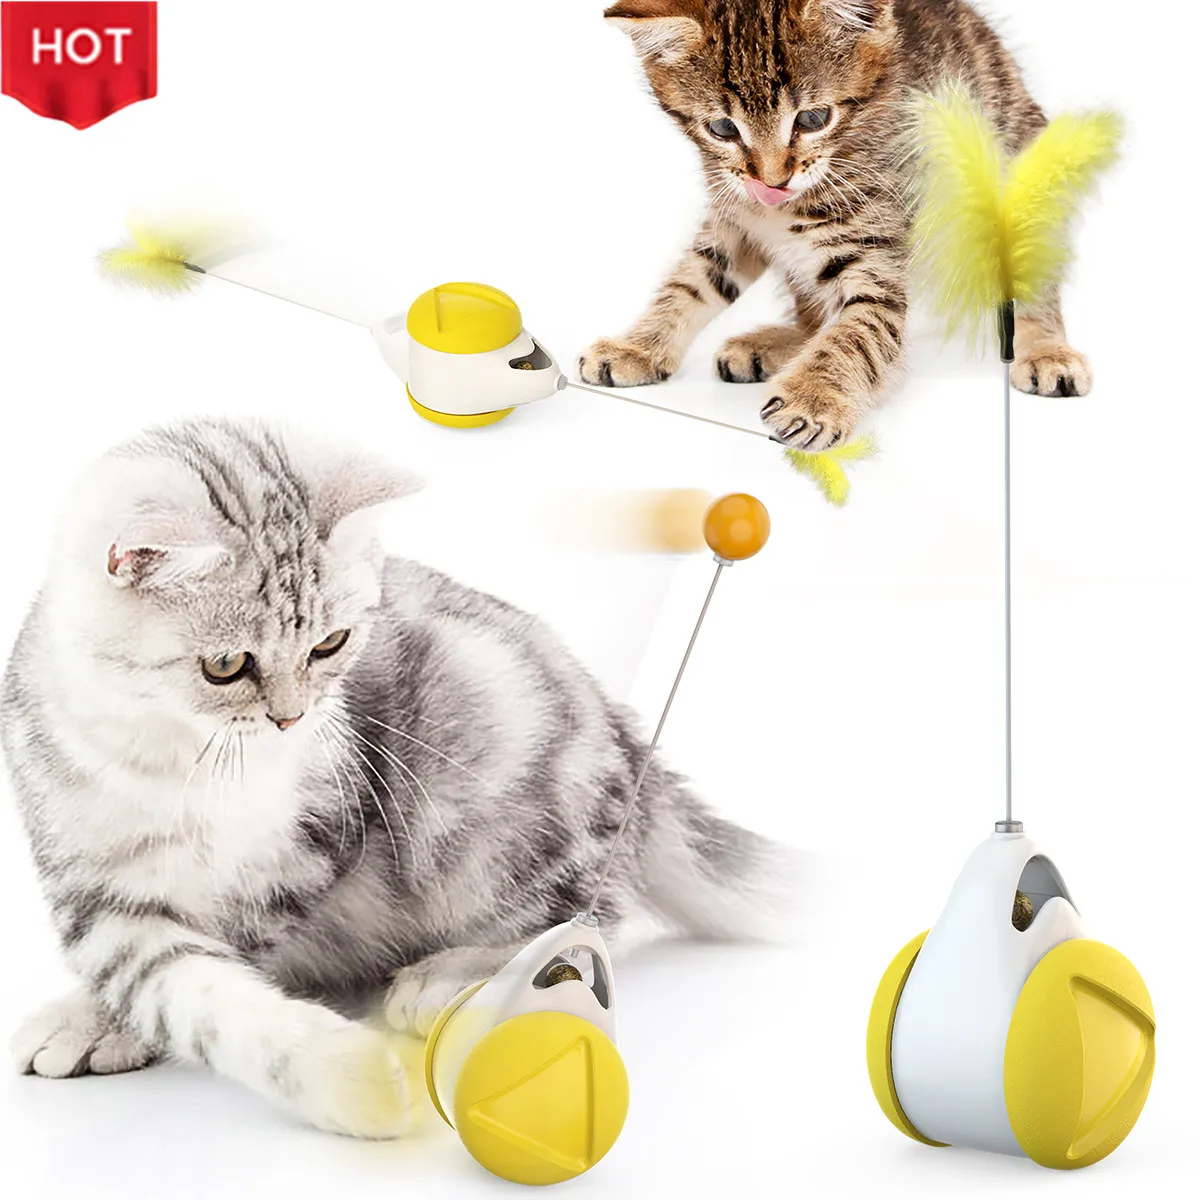 

Amazon Hot Sale Pet Products Cat Toy Ball Kitten Balanced Swing Mint Cat Teaser Toy With Catnip Ball Pet Toy, Customizable